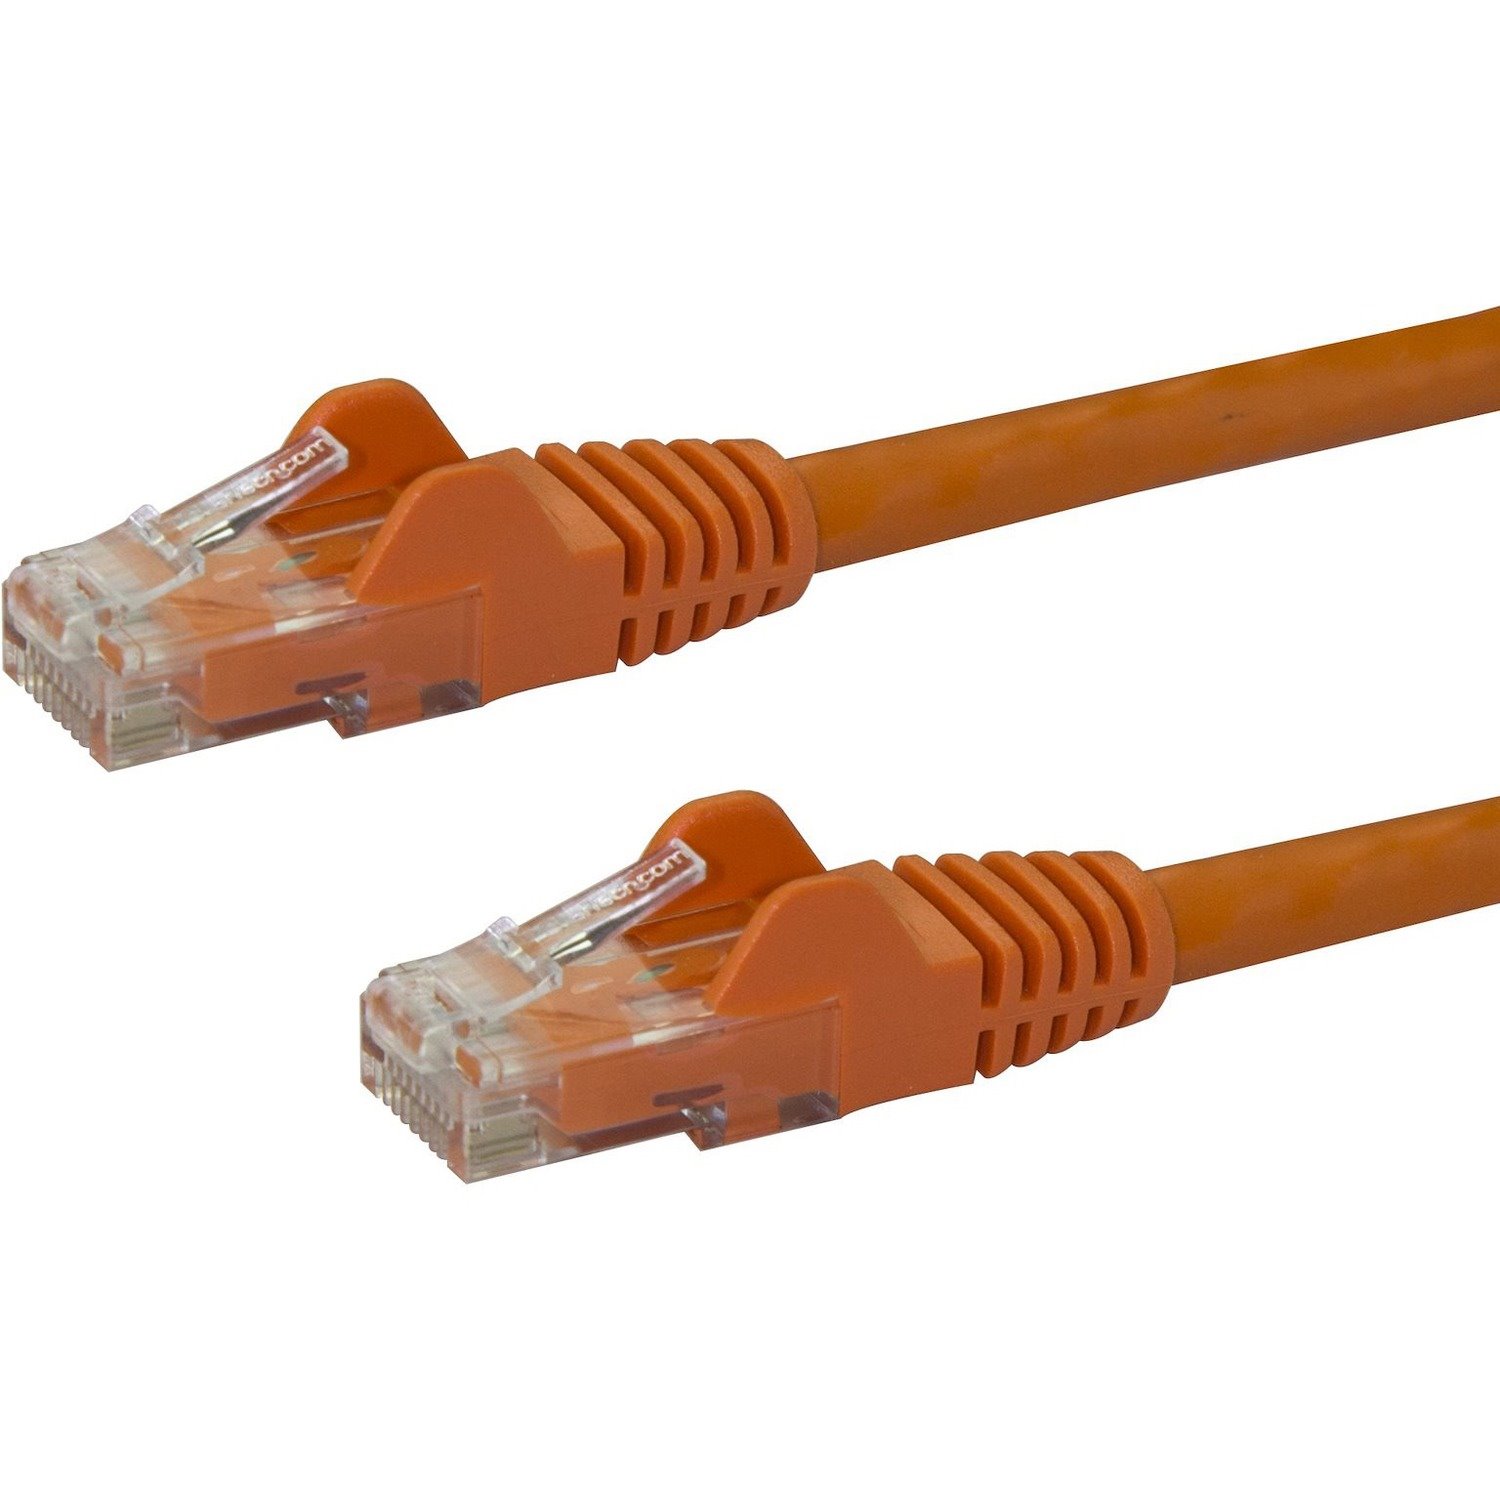 StarTech.com 20ft CAT6 Ethernet Cable - Orange Snagless Gigabit - 100W PoE UTP 650MHz Category 6 Patch Cord UL Certified Wiring/TIA